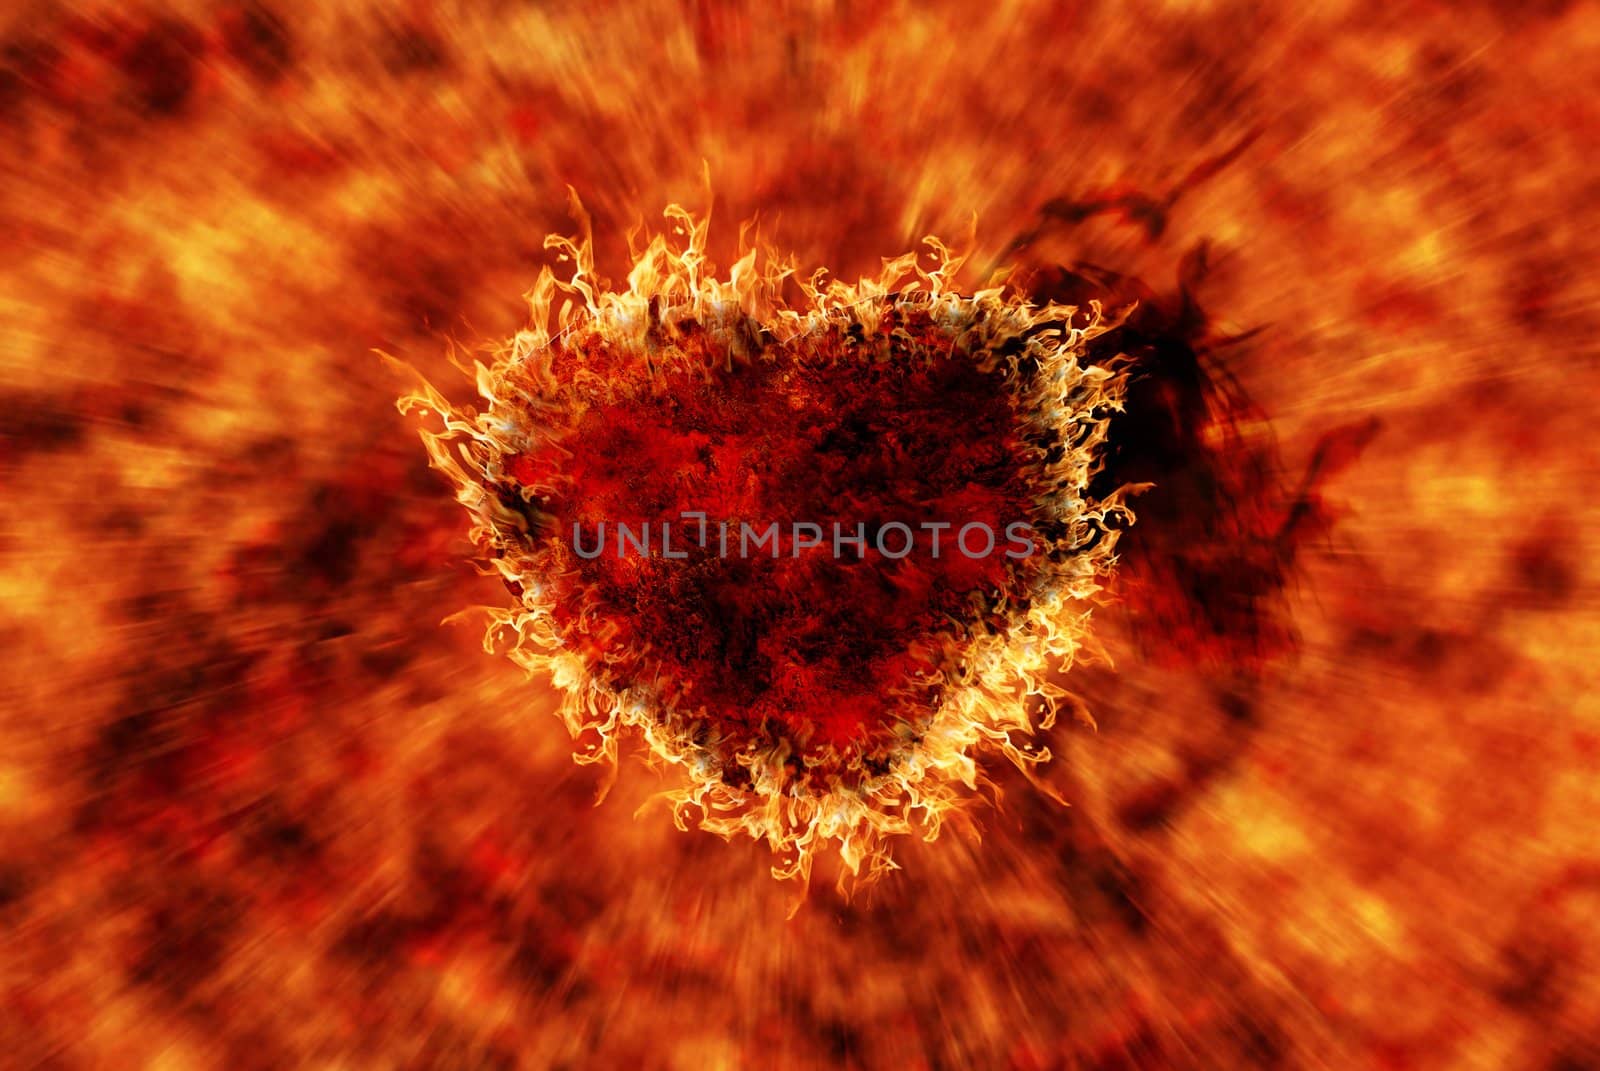 Burning heart with flame effect by sasilsolutions